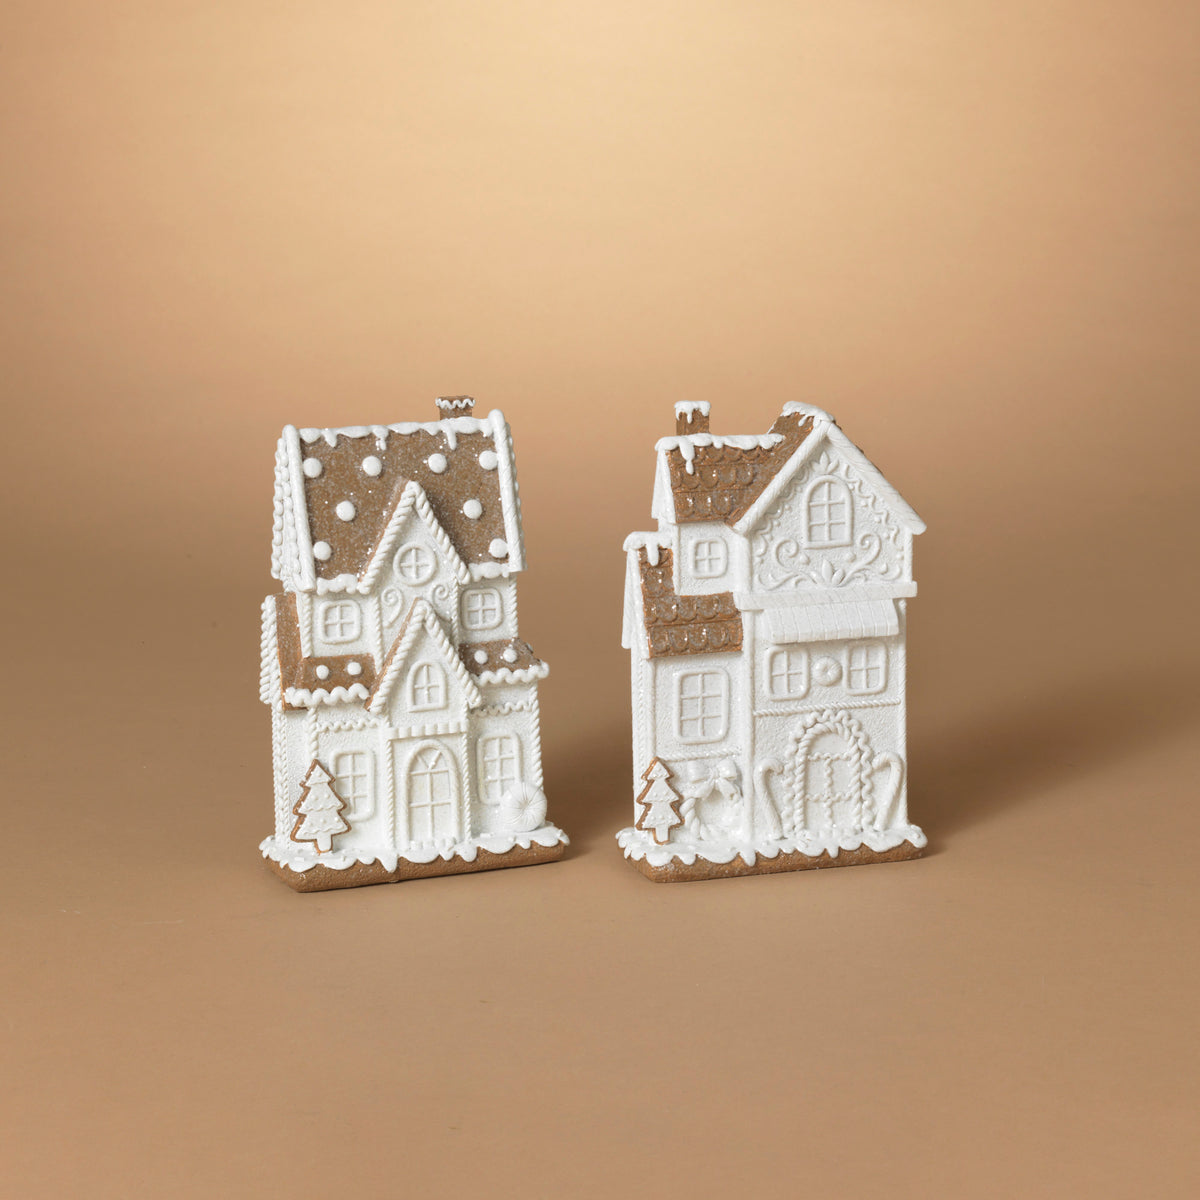 8.27"H Resin Holiday Gingerbread House